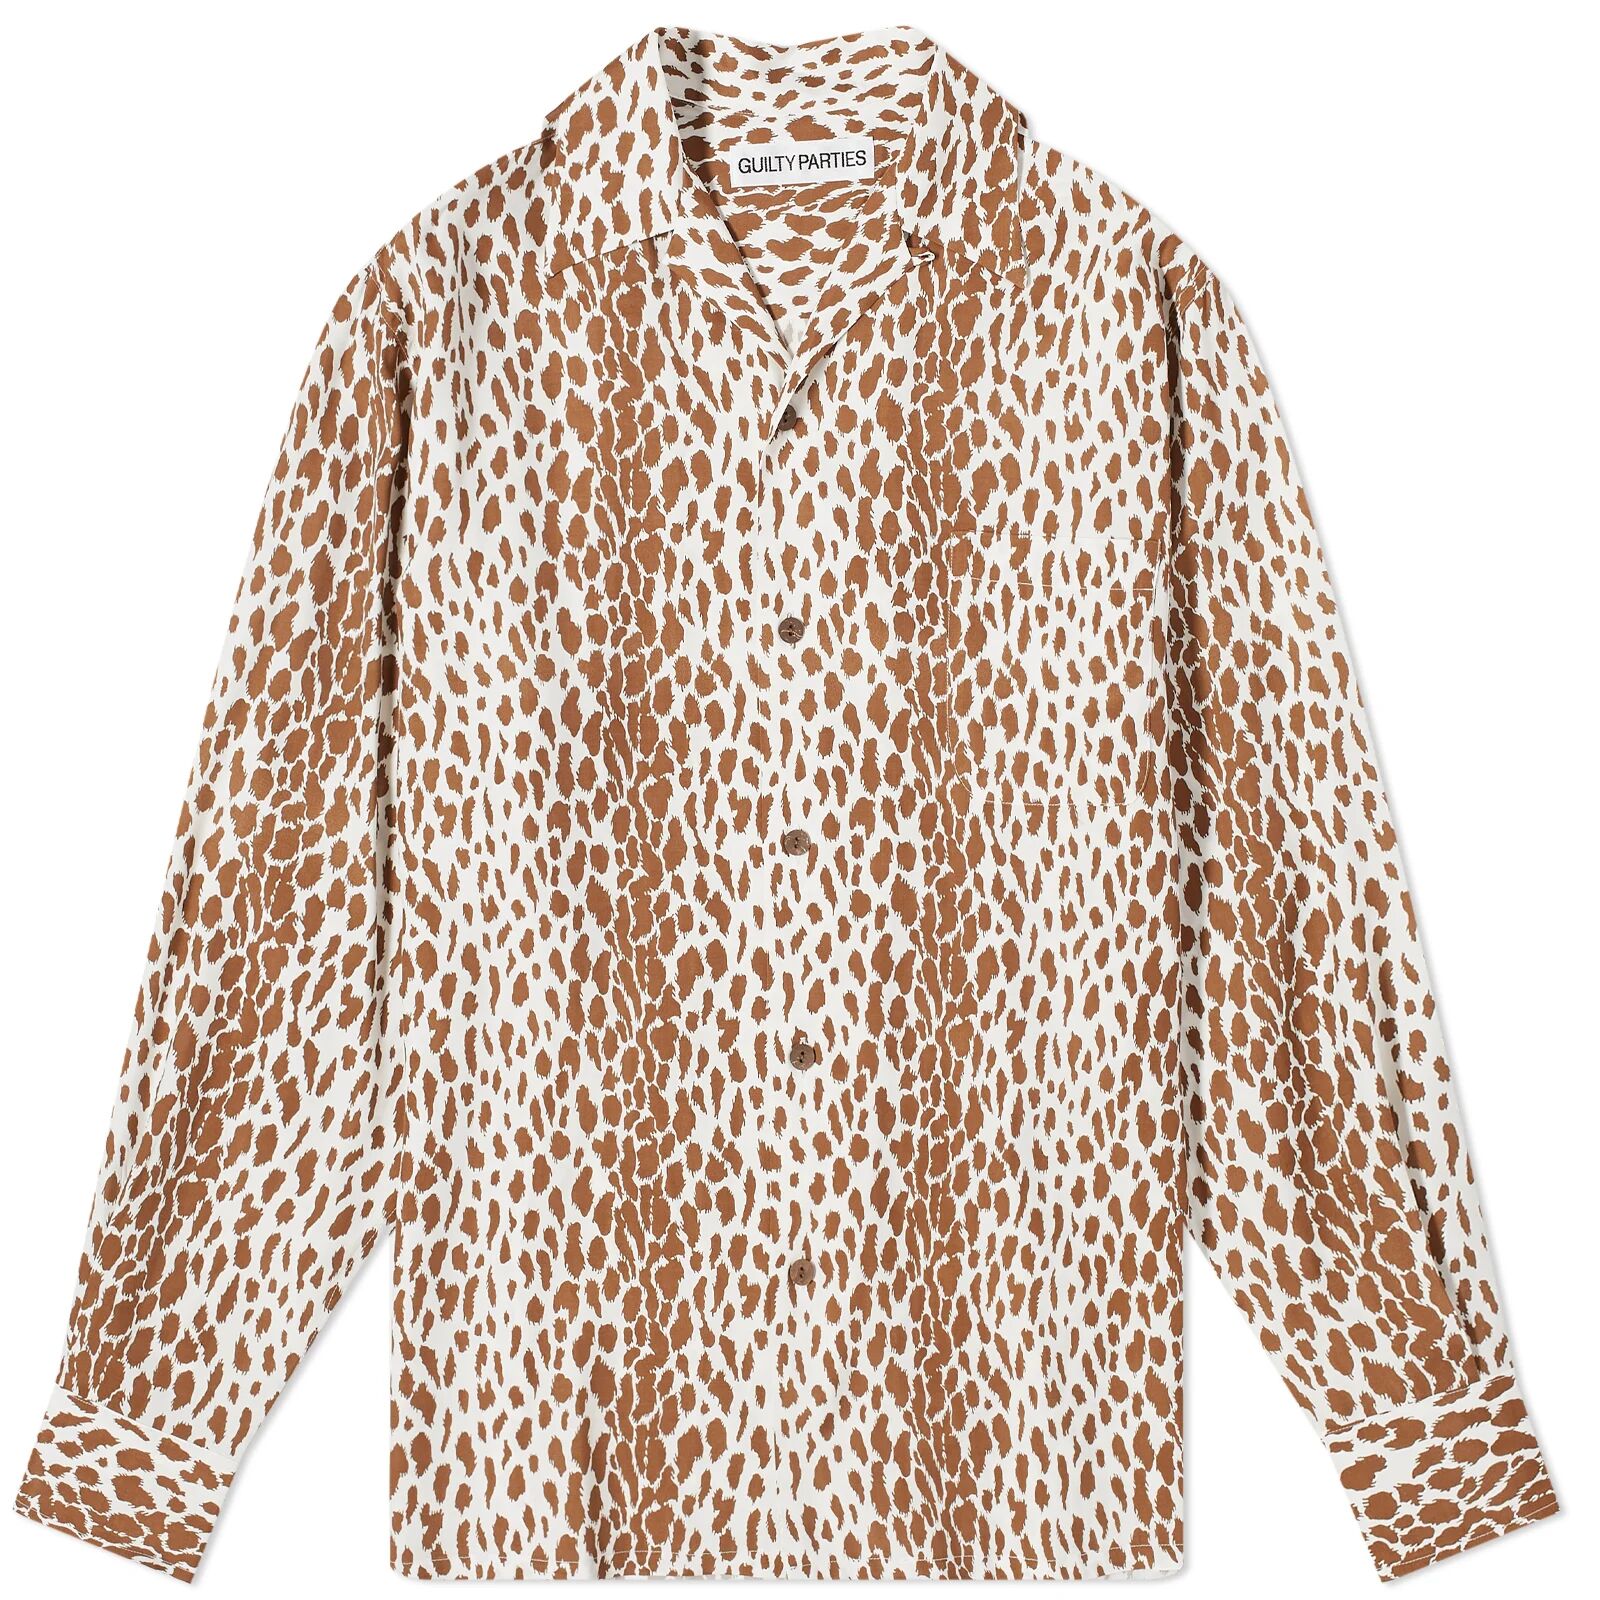 Wacko Maria Men's Long Sleeve Leopard Vacation Shirt in Brown, Size Small